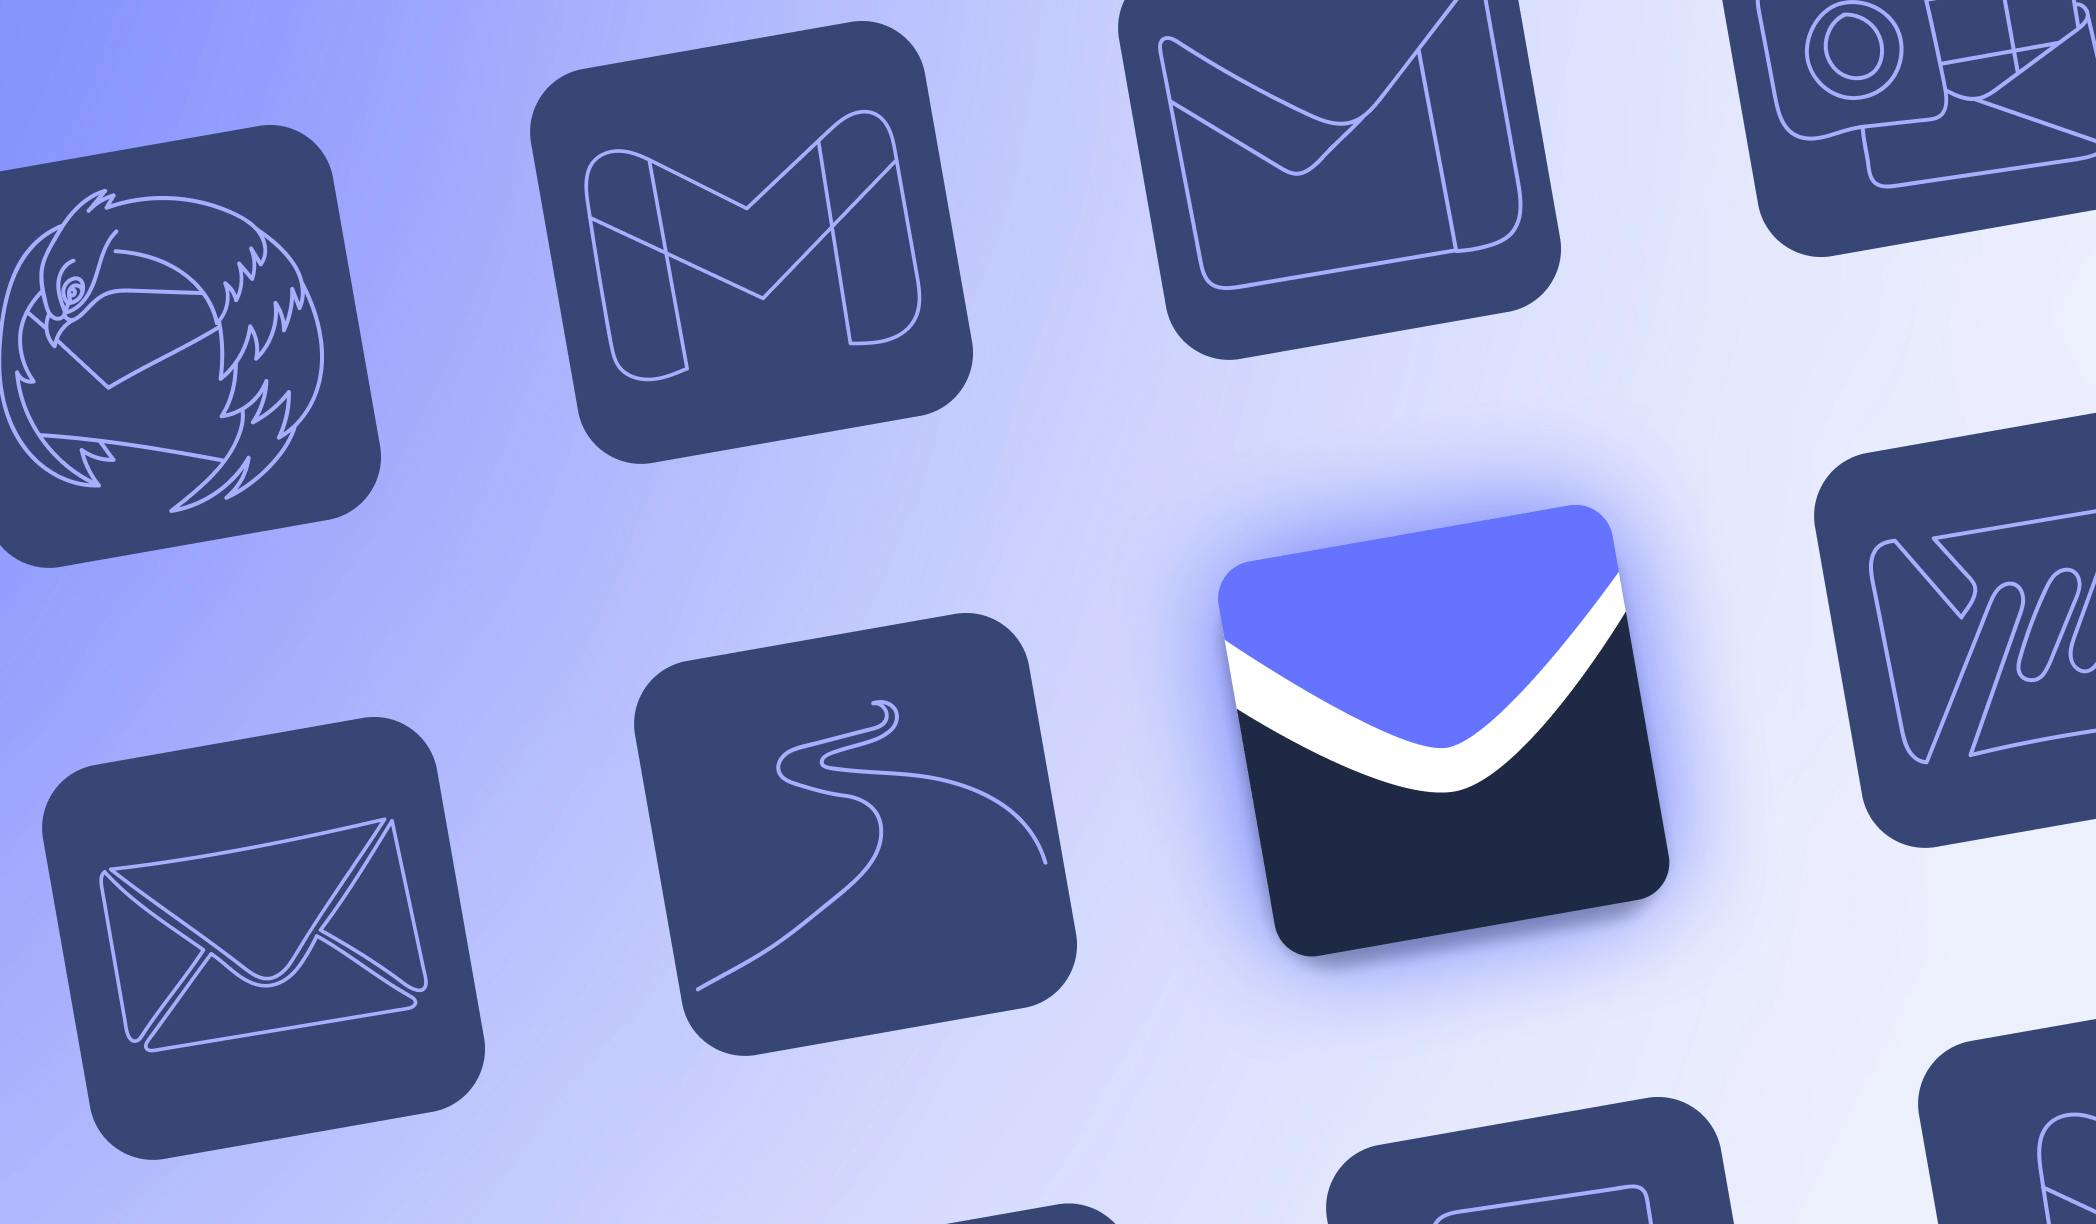 Blogpost image of about 8 app like squares of different illustrated logos from email providers, such as Thunderbird, Gmail, Proton, Outlook, Apple Mail, Tutanota, Mailfence and StartMail. The StartMail logo stands out from the rest